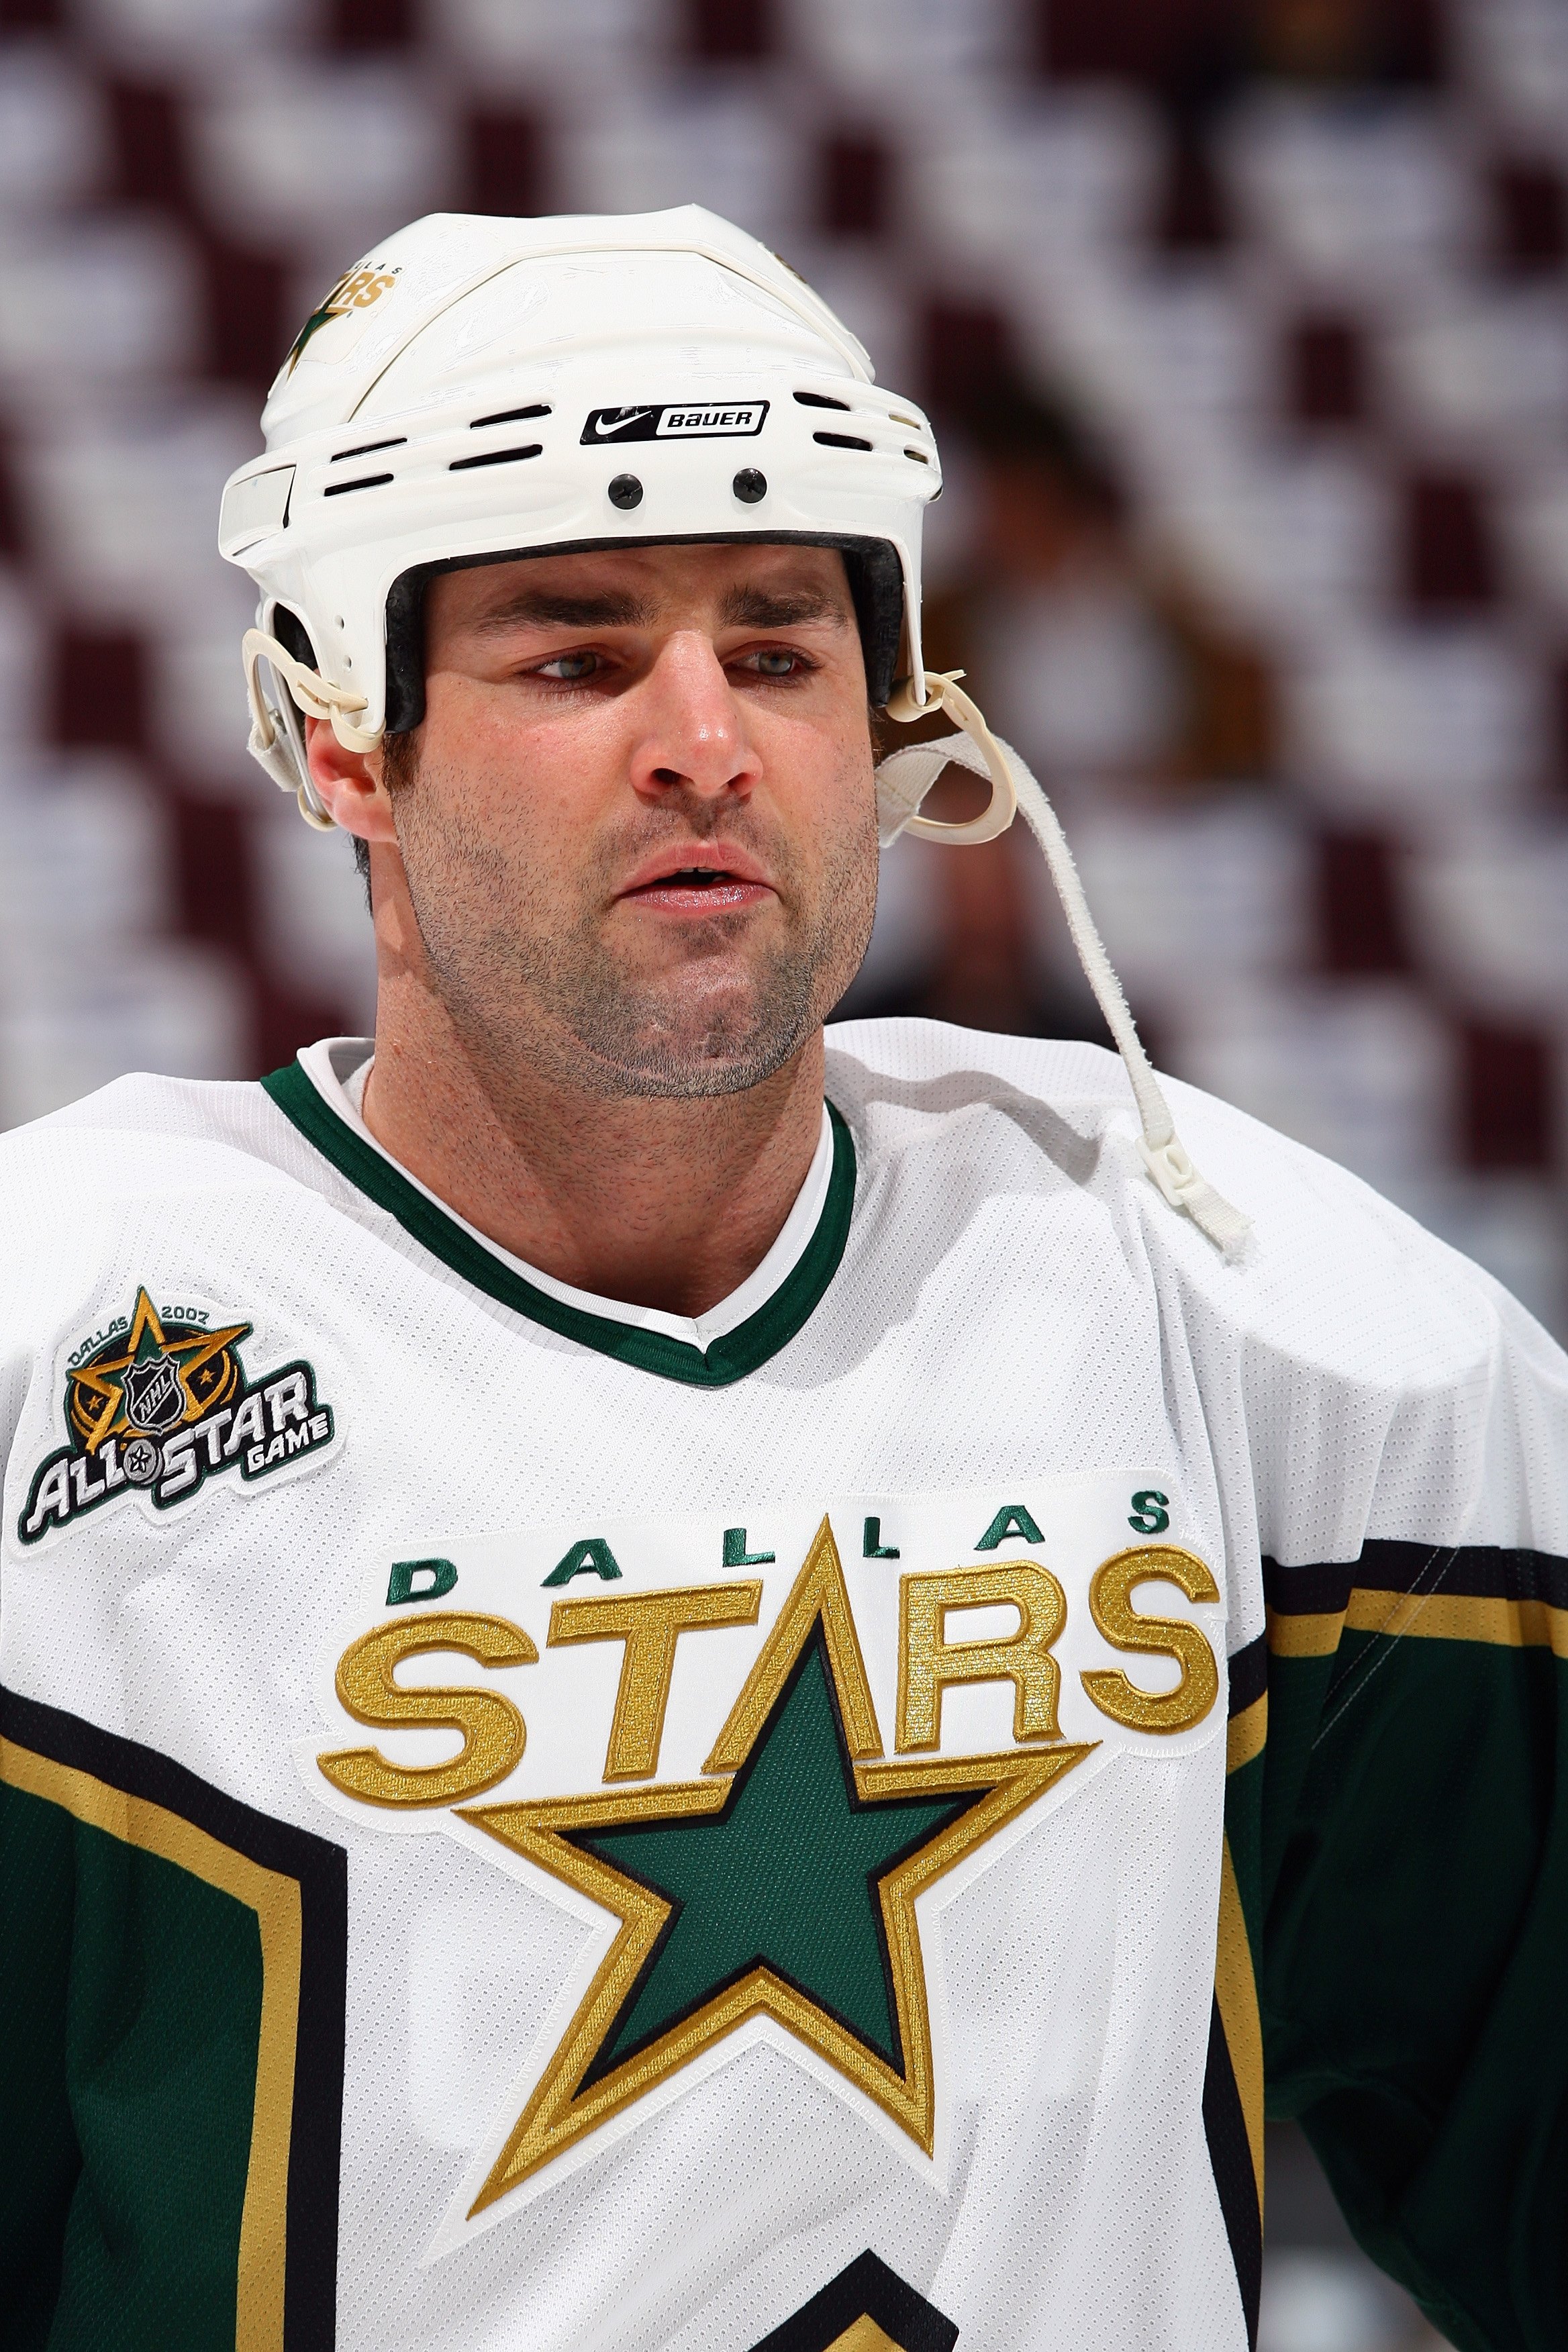 VANCOUVER, BC - APRIL 23:  Eric Lindros #88 of the Dallas Stars looks on against the Vancouver Canucks during Game 7 of the 2007 Western Conference Quarterfinals at General Motors Place on April 23, 2007 in Vancouver, British Columbia, Canada. The Canucks